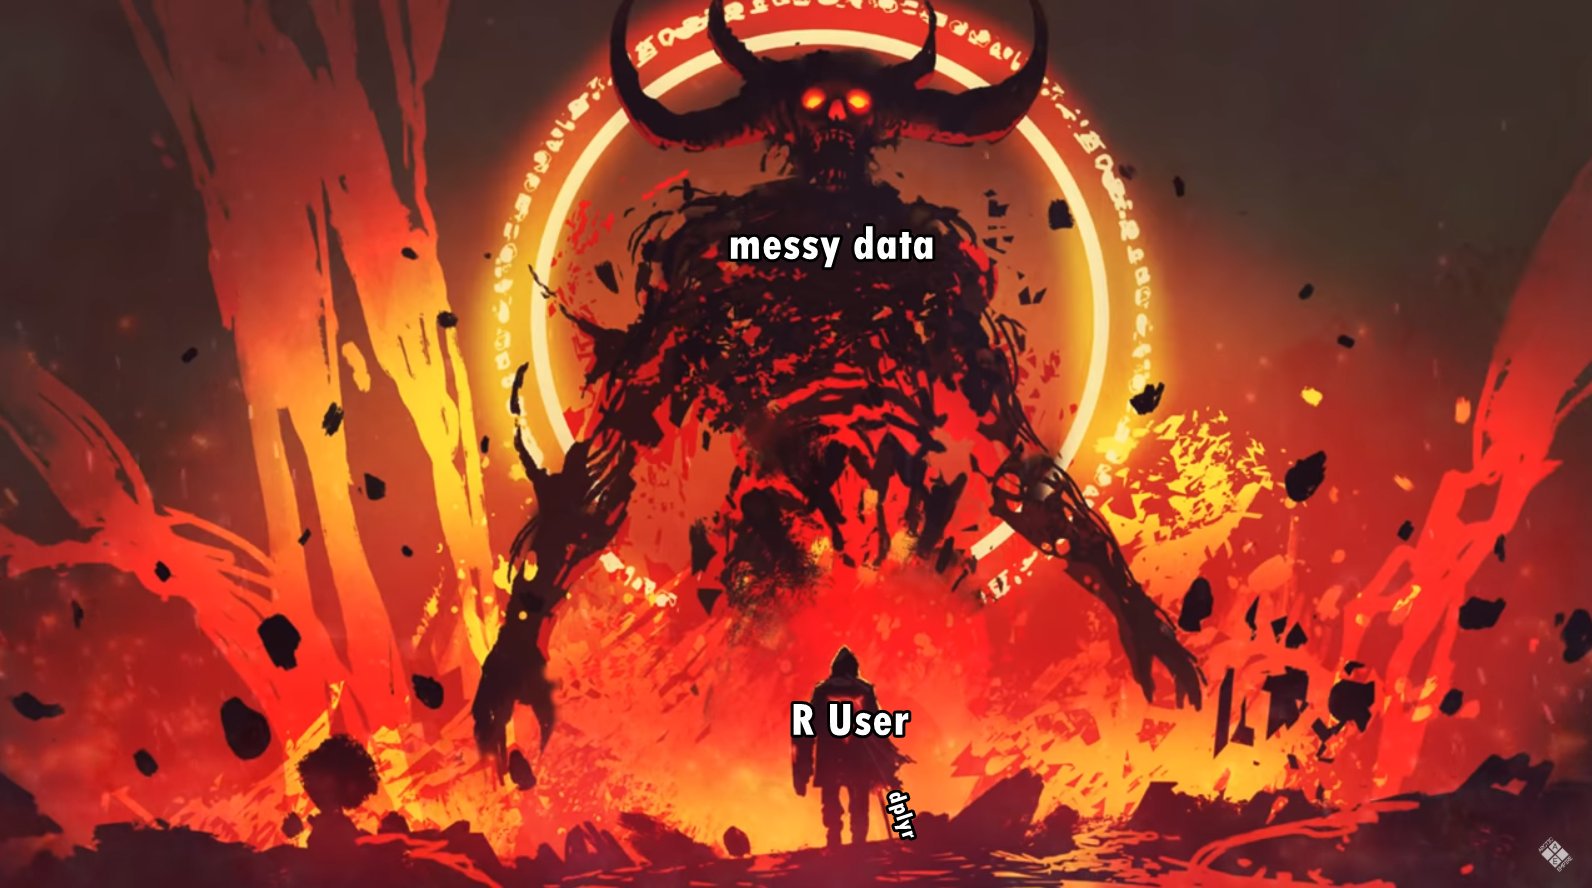 A giant demon emerging from fire labelled 'messy data'; in front is a tiny human labelled 'R User'